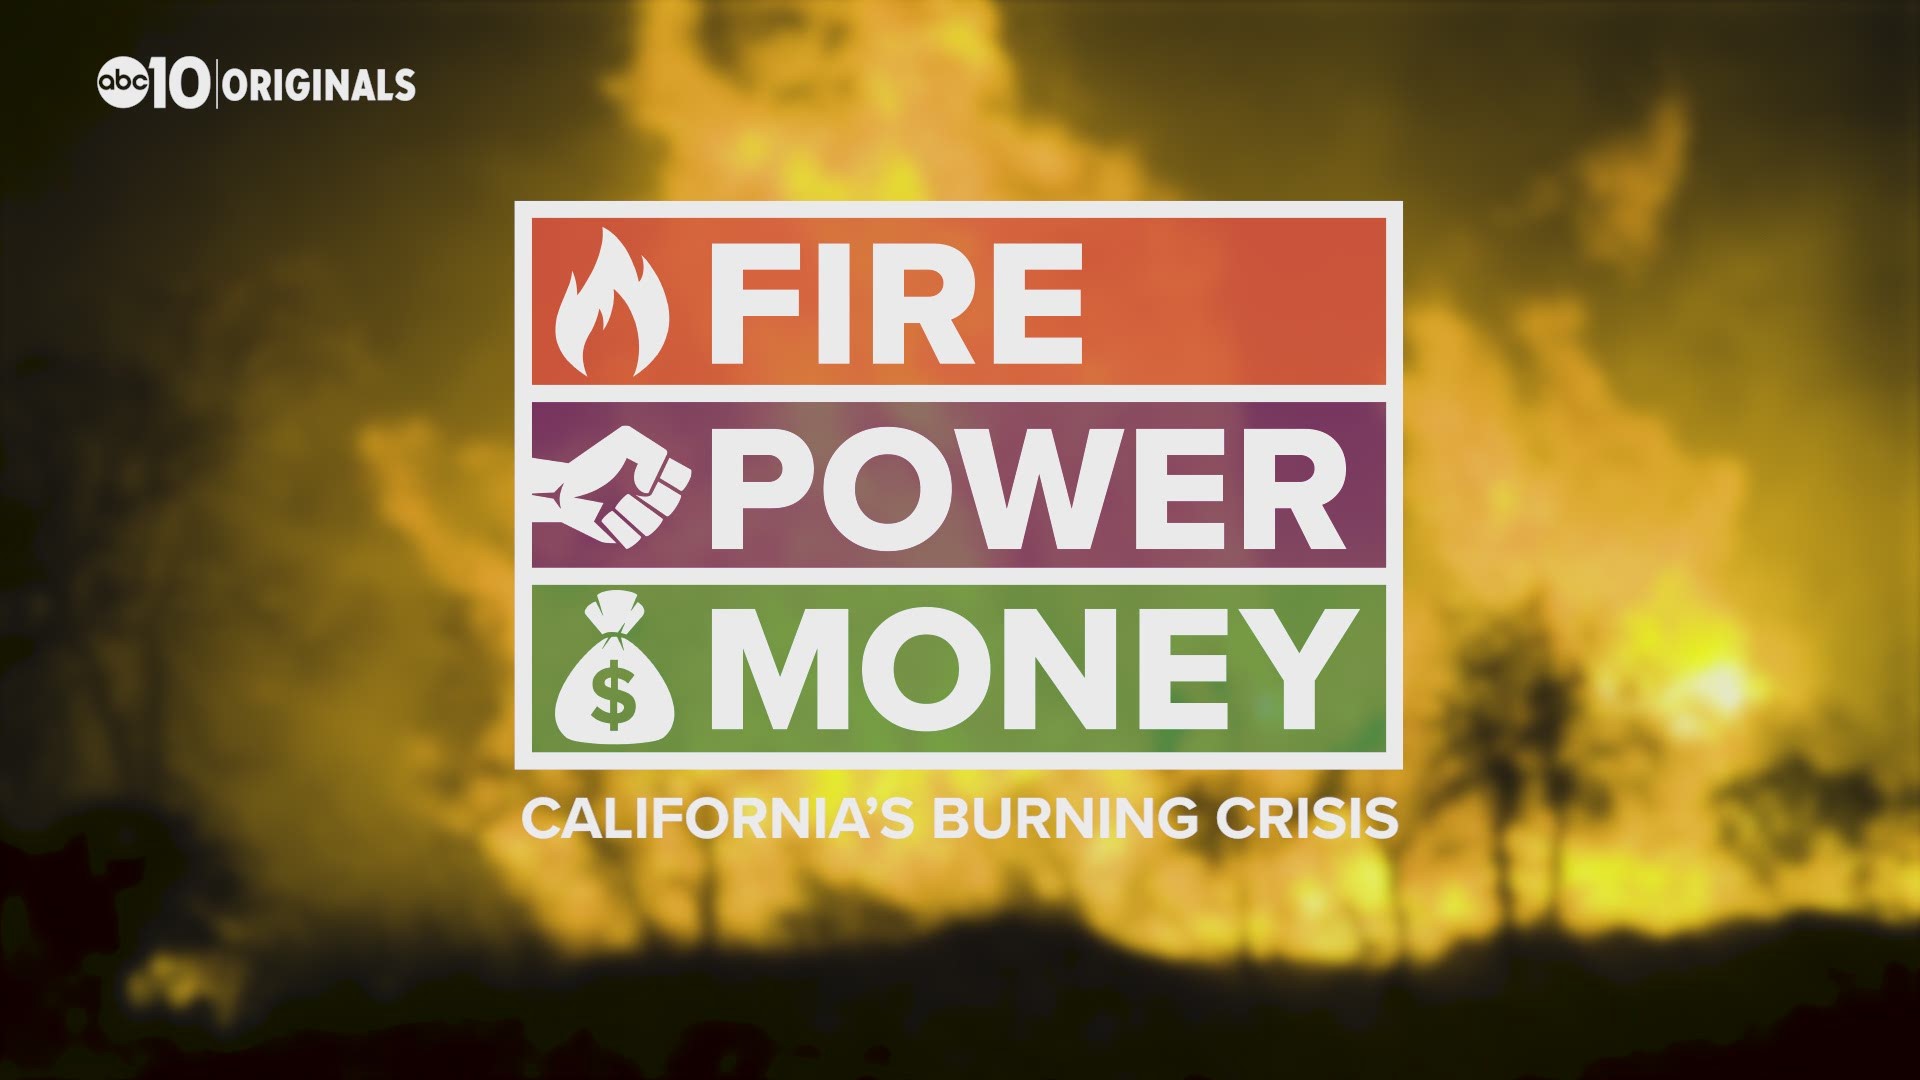 With California’s wildfires growing deadlier and bigger than ever, ABC10 examines the connection between wildfires, PG&E and its influence on California politics.